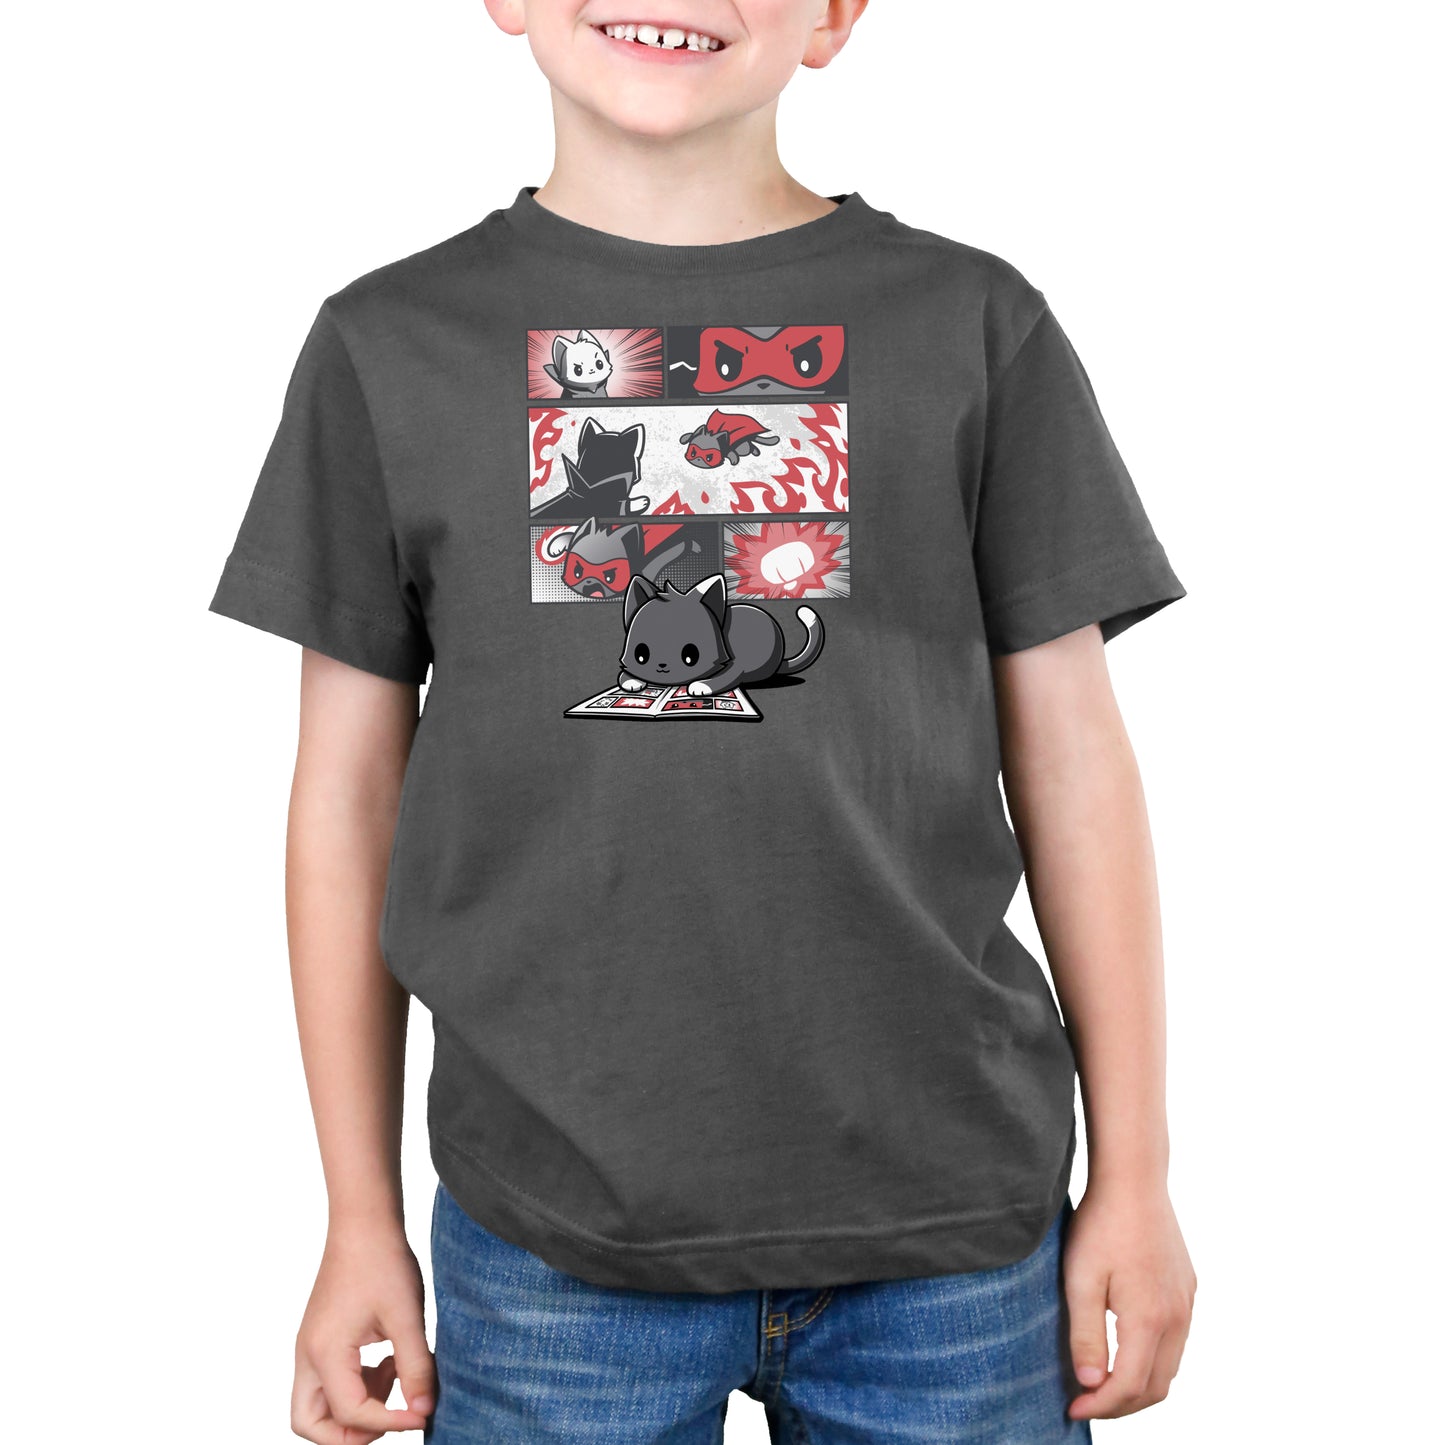 A child wearing a charcoal gray t-shirt featuring a monsterdigital original cartoon design of Supercat Comic in various action poses.